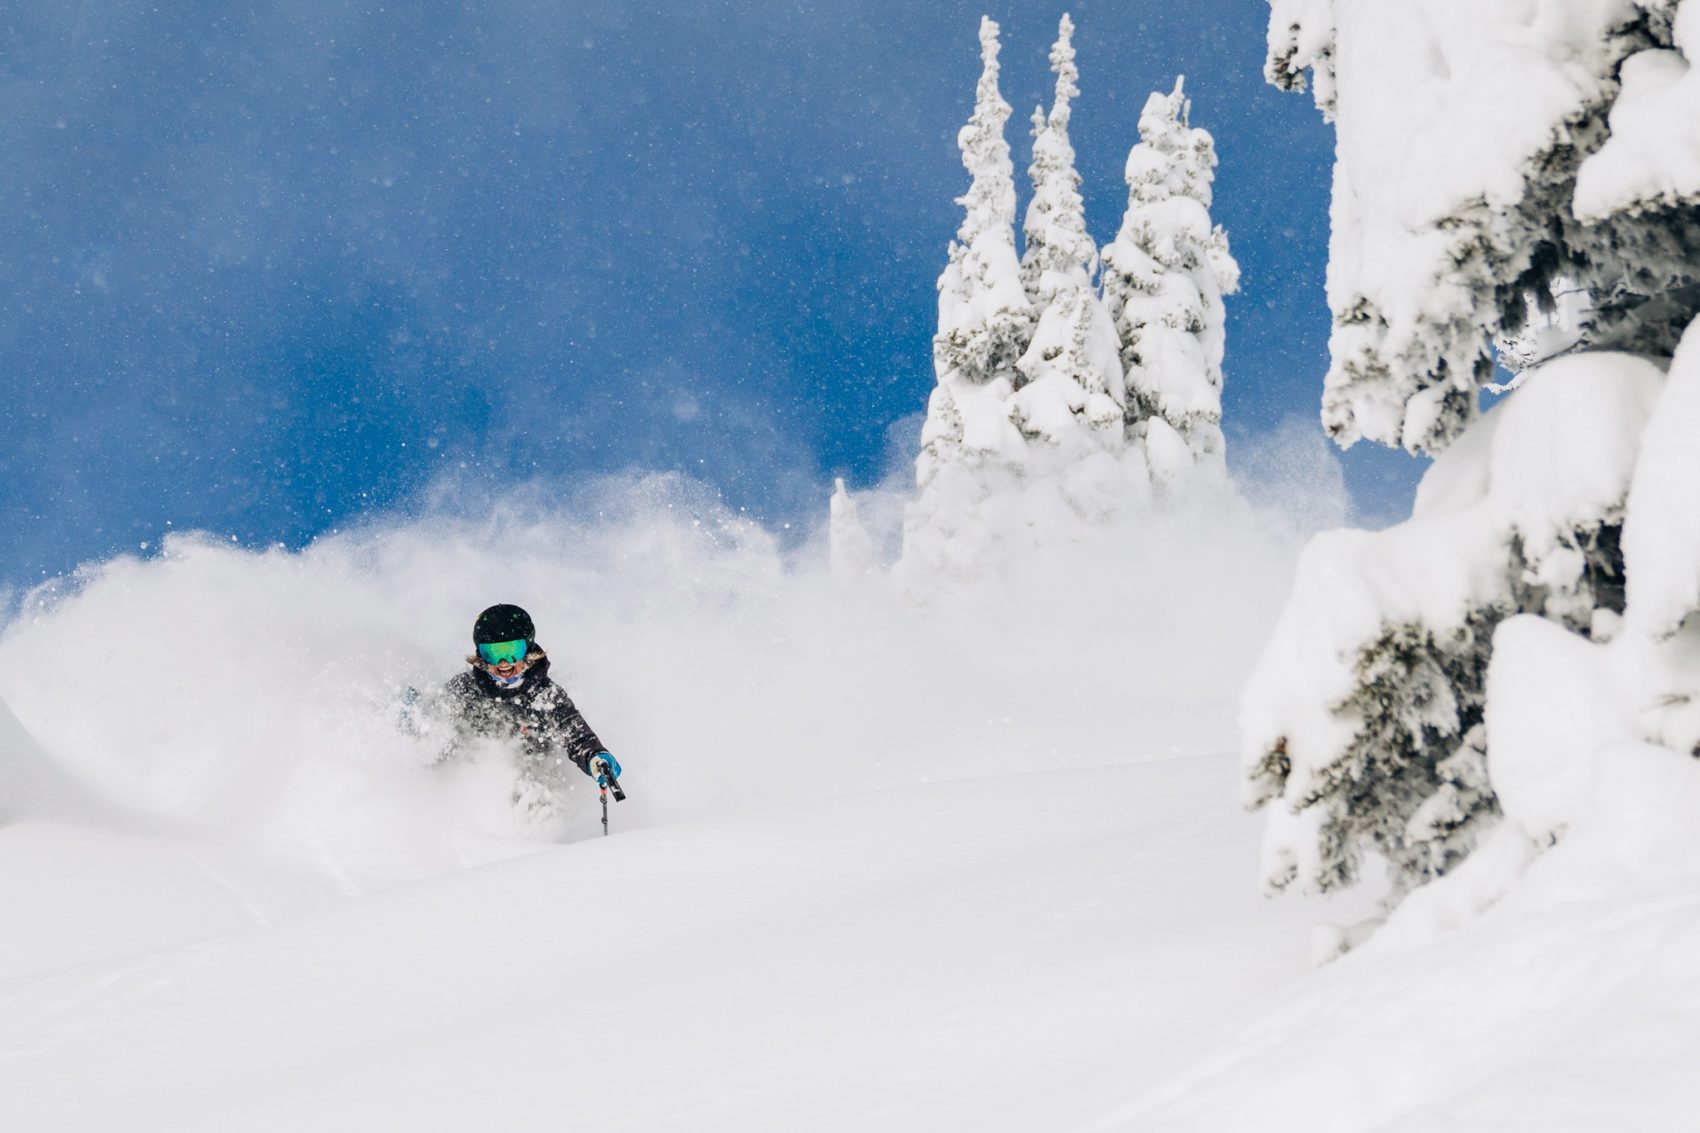 Skier in deep snow at Crystal Mountain, WA, one of the US's most Google ski resorts